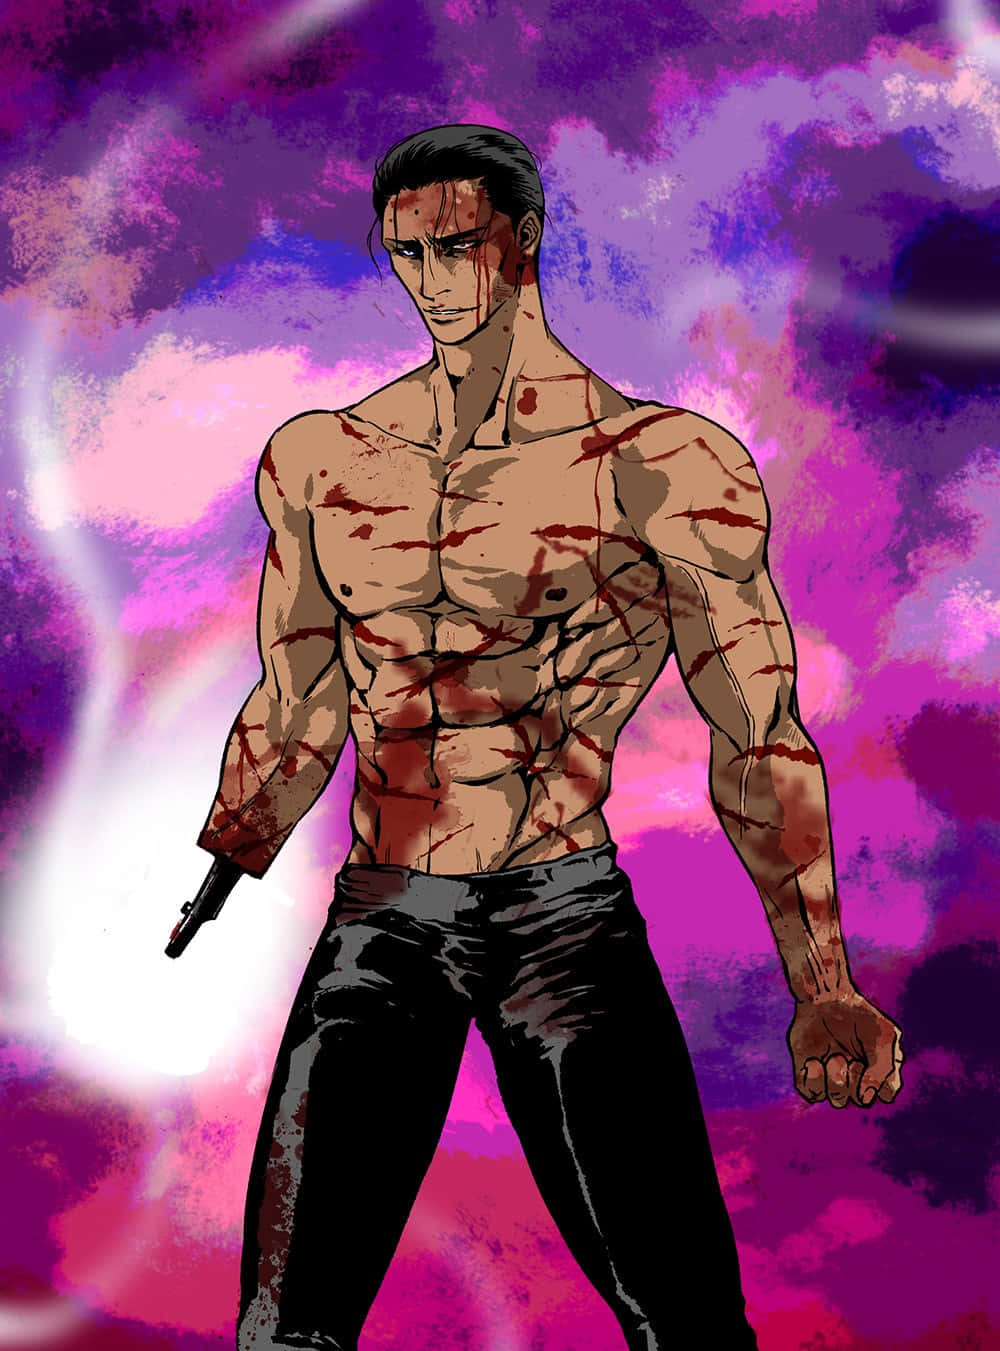 Muscled Anime Character Bloody Battle Stance Wallpaper